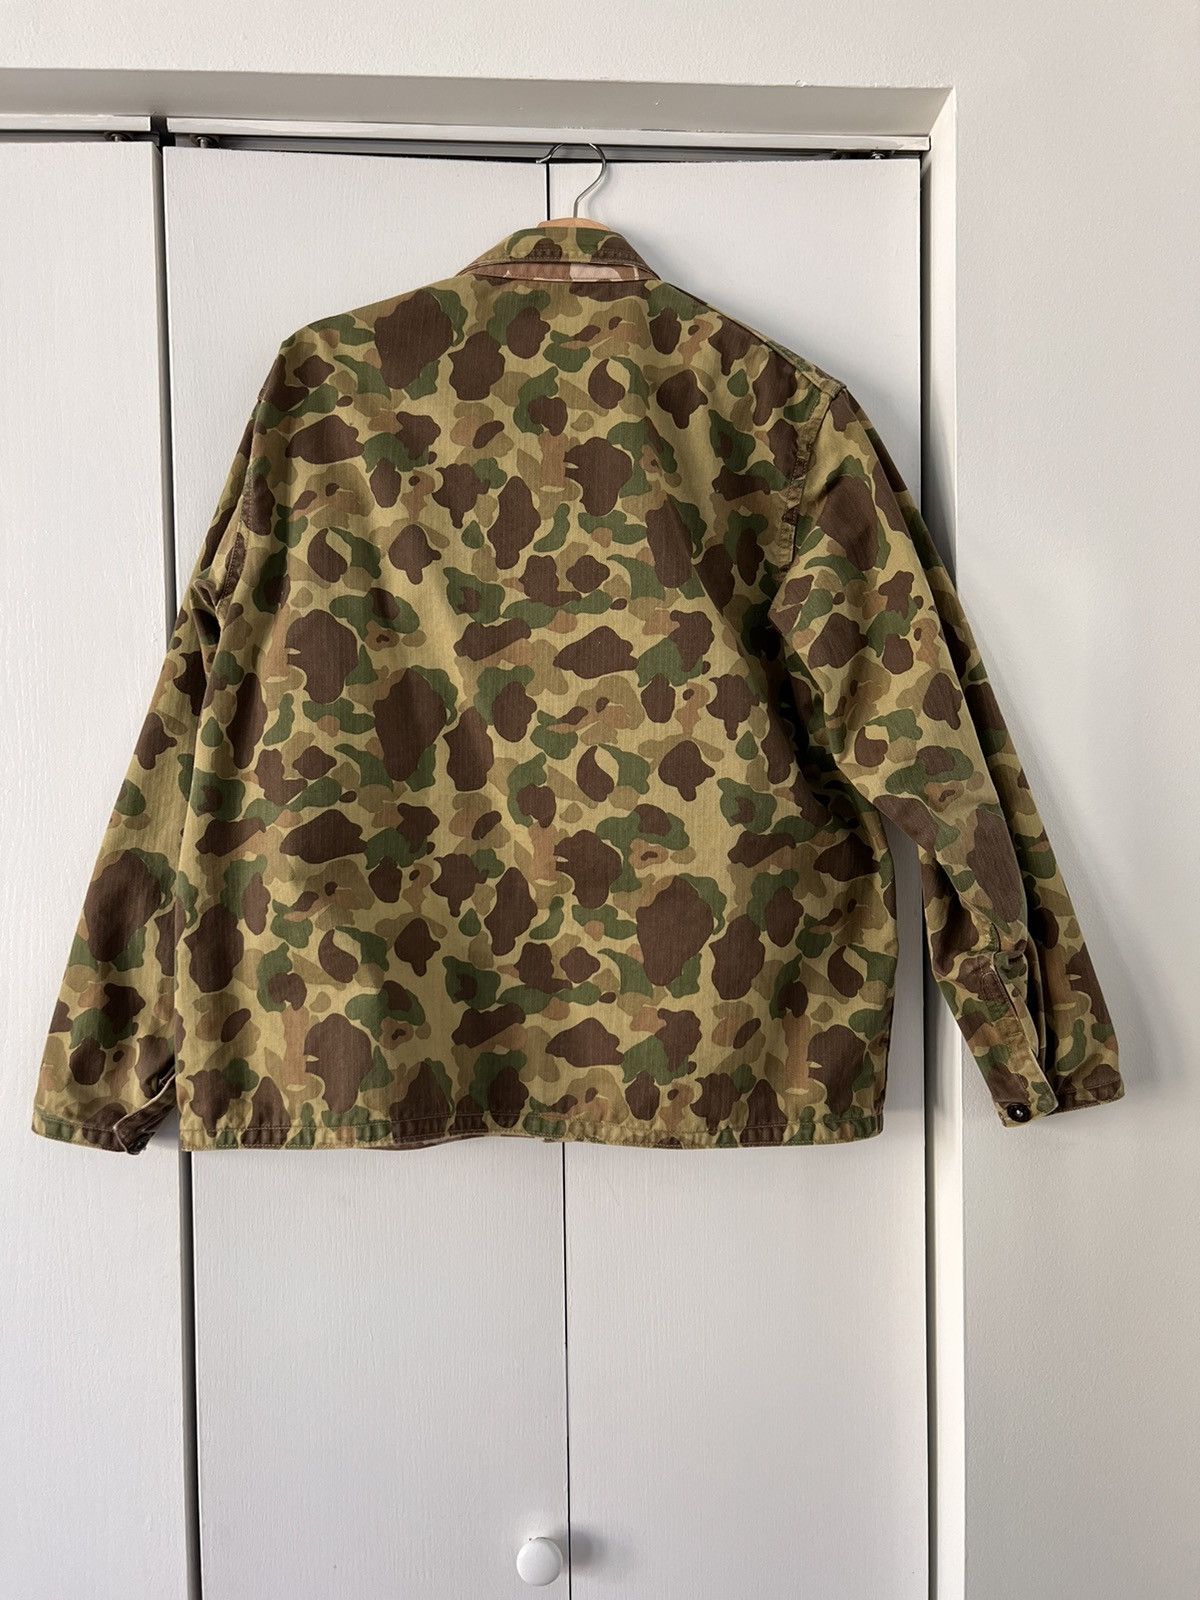 The Real McCoy's The REAL McCOY’s P1944 Frogskin Camo Jacket Size US M / EU 48-50 / 2 - 5 Thumbnail